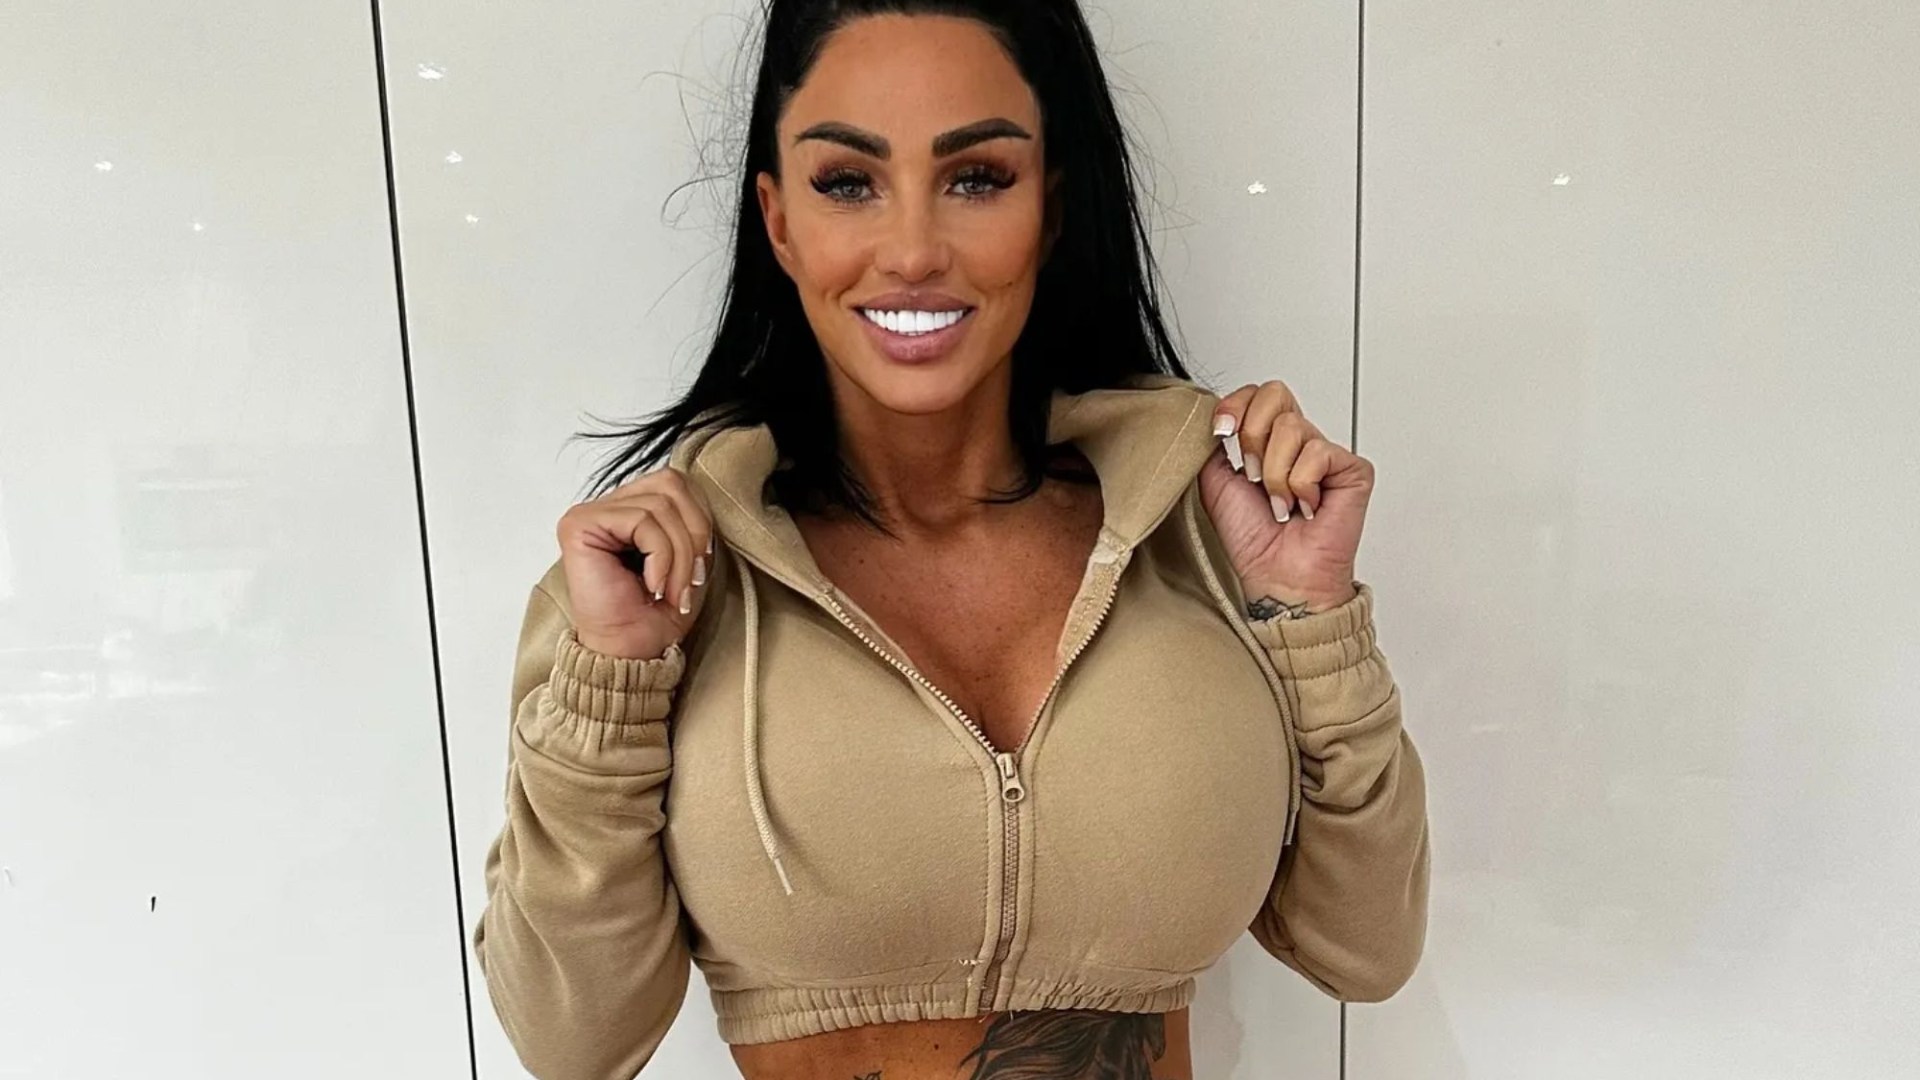 I wont stop surgery – I want to look like a Bratz doll says Katie Price as she vows not to quit stripping OnlyFans [Video]